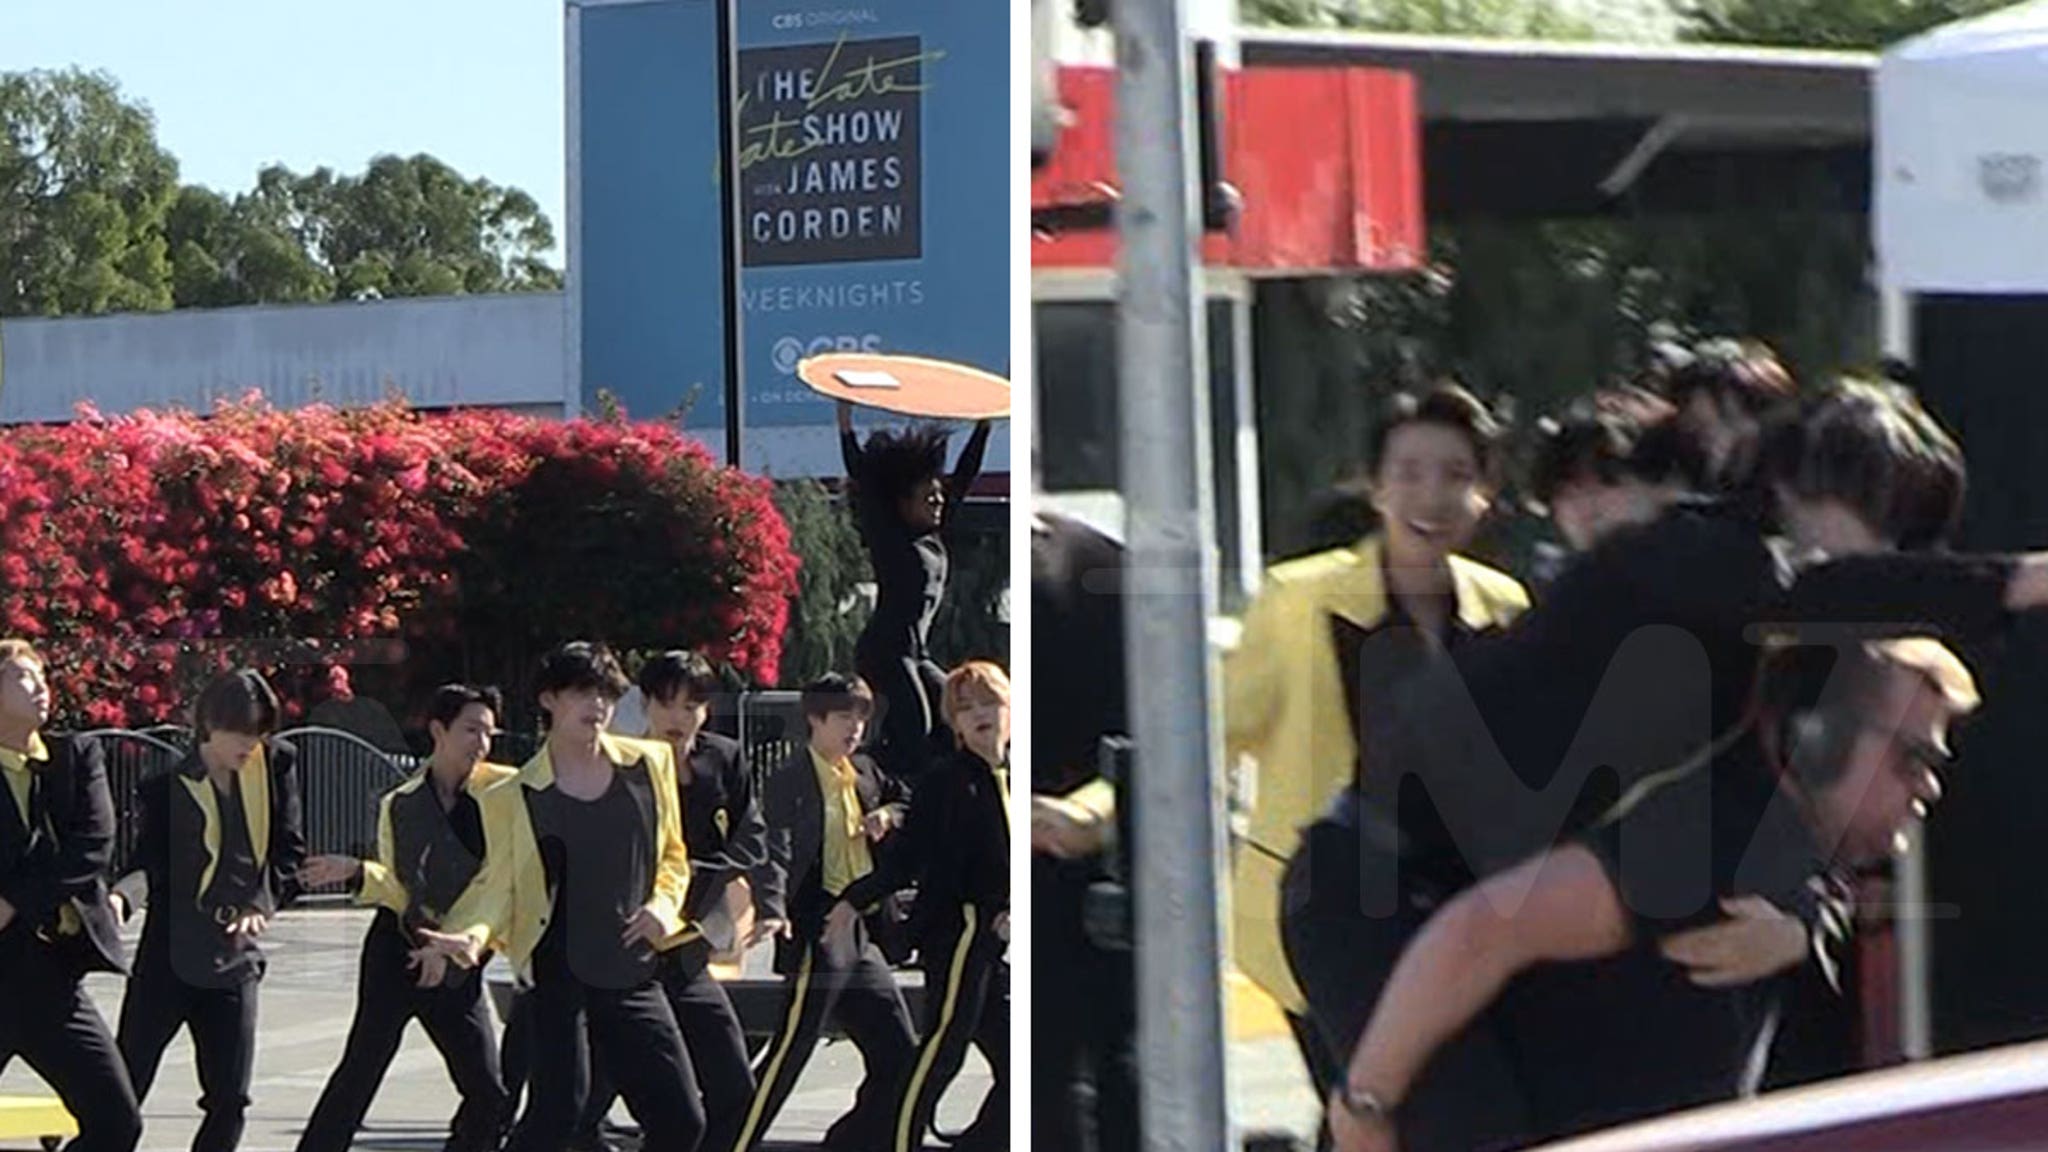 BTS Puts On Traffic-Stopping 'Butter' Show with James Corden - TMZ